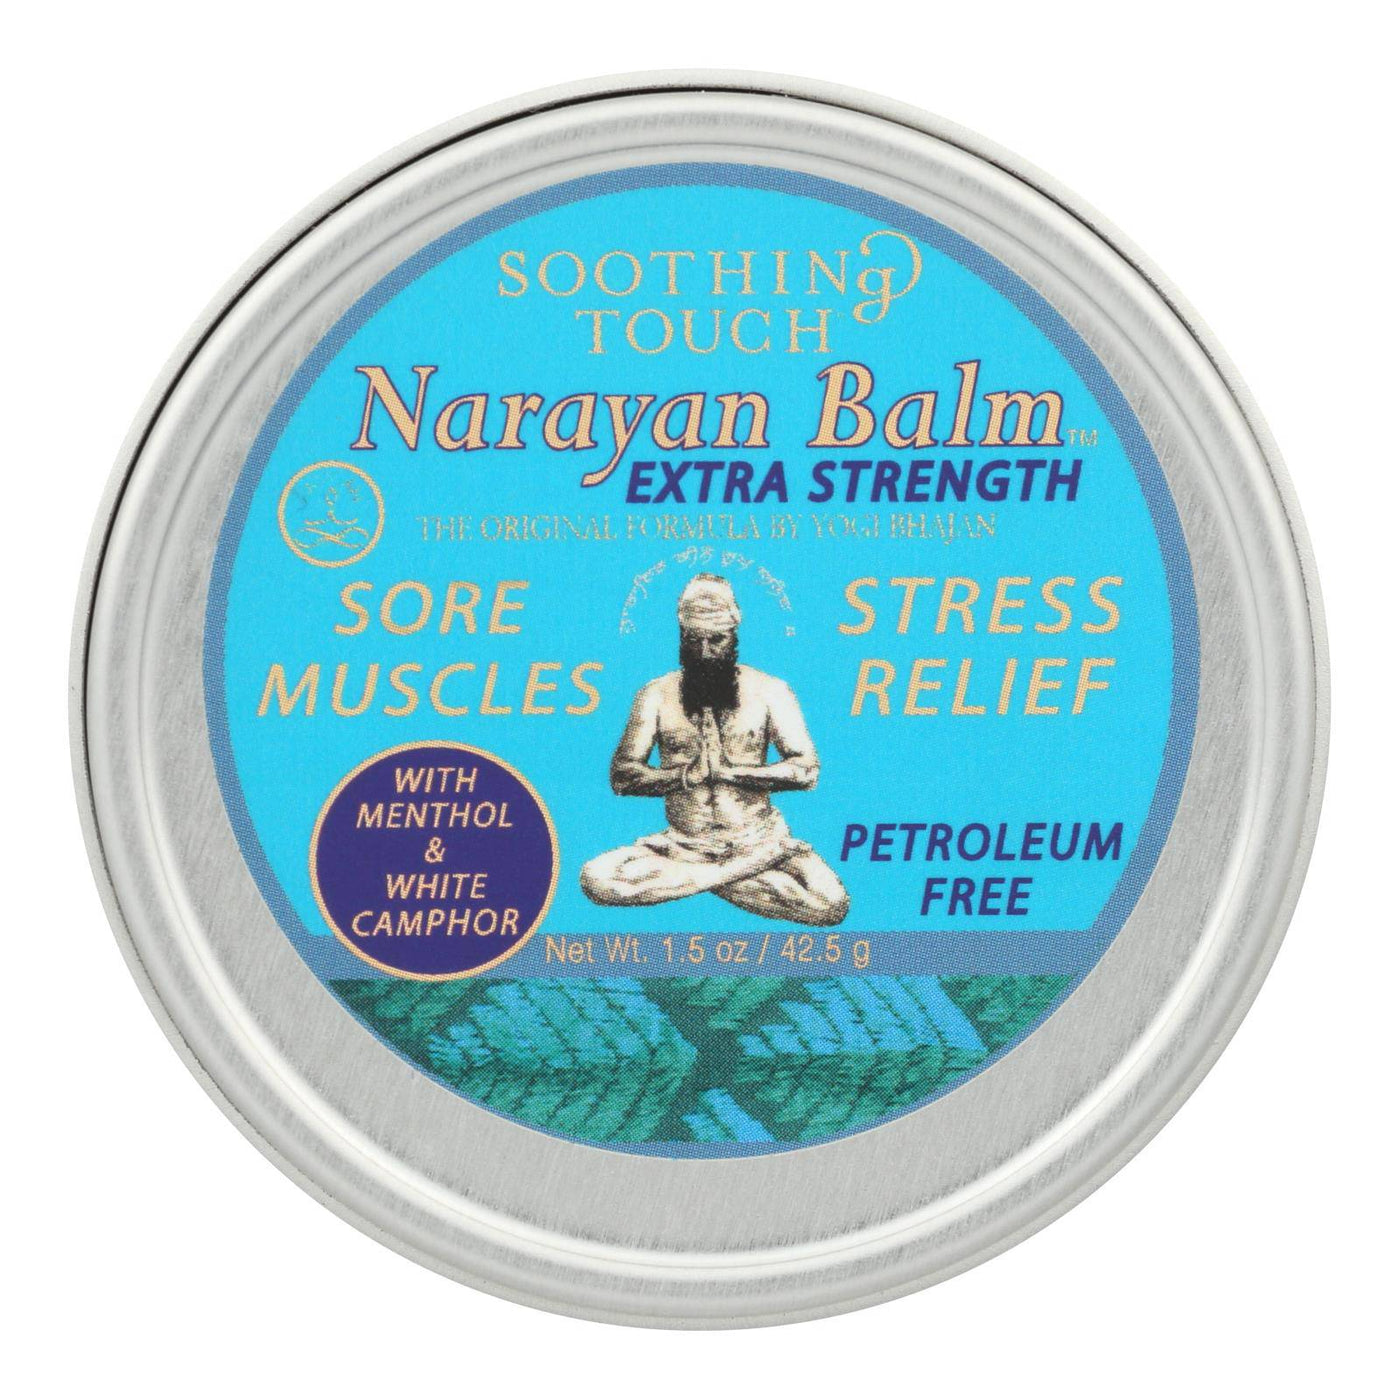 Buy Soothing Touch Narayan Balm - Extra Strength - Case Of 6 - 1.5 Oz  at OnlyNaturals.us